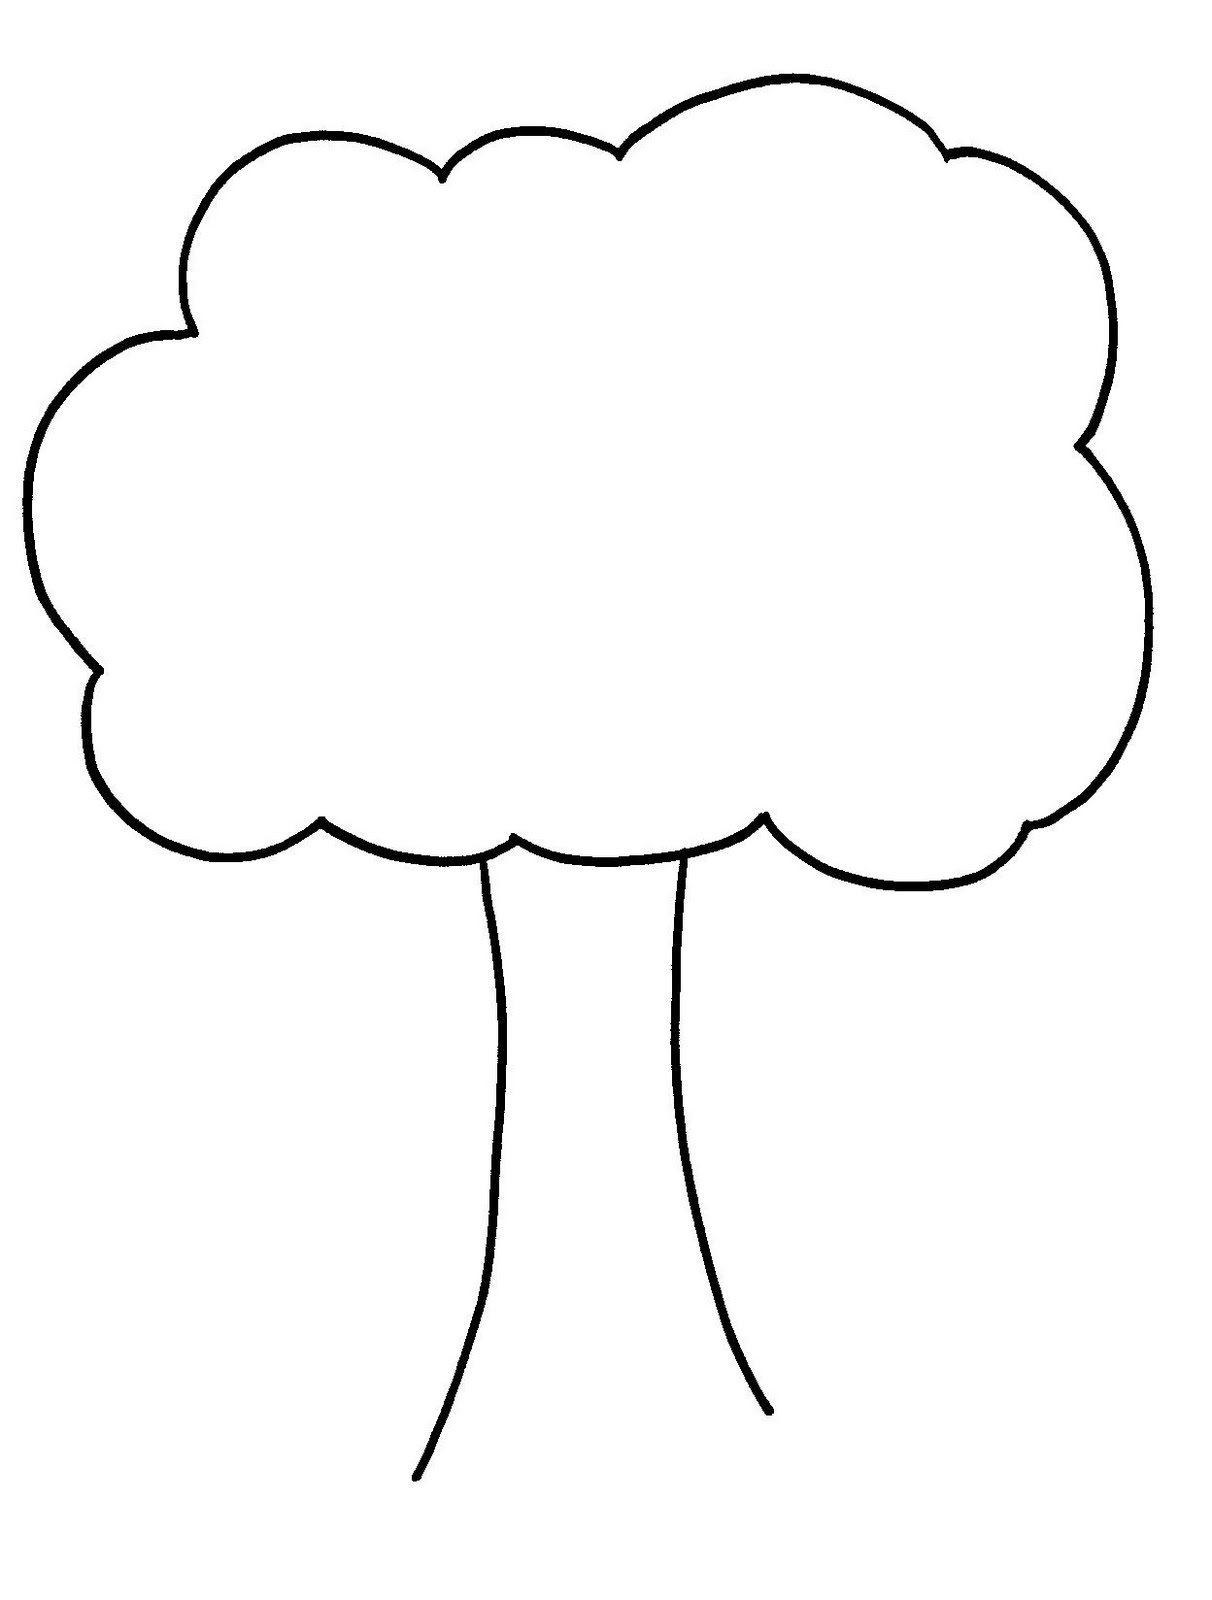 Free Tree Trunk Clipart, Download Free Tree Trunk Clipart png images